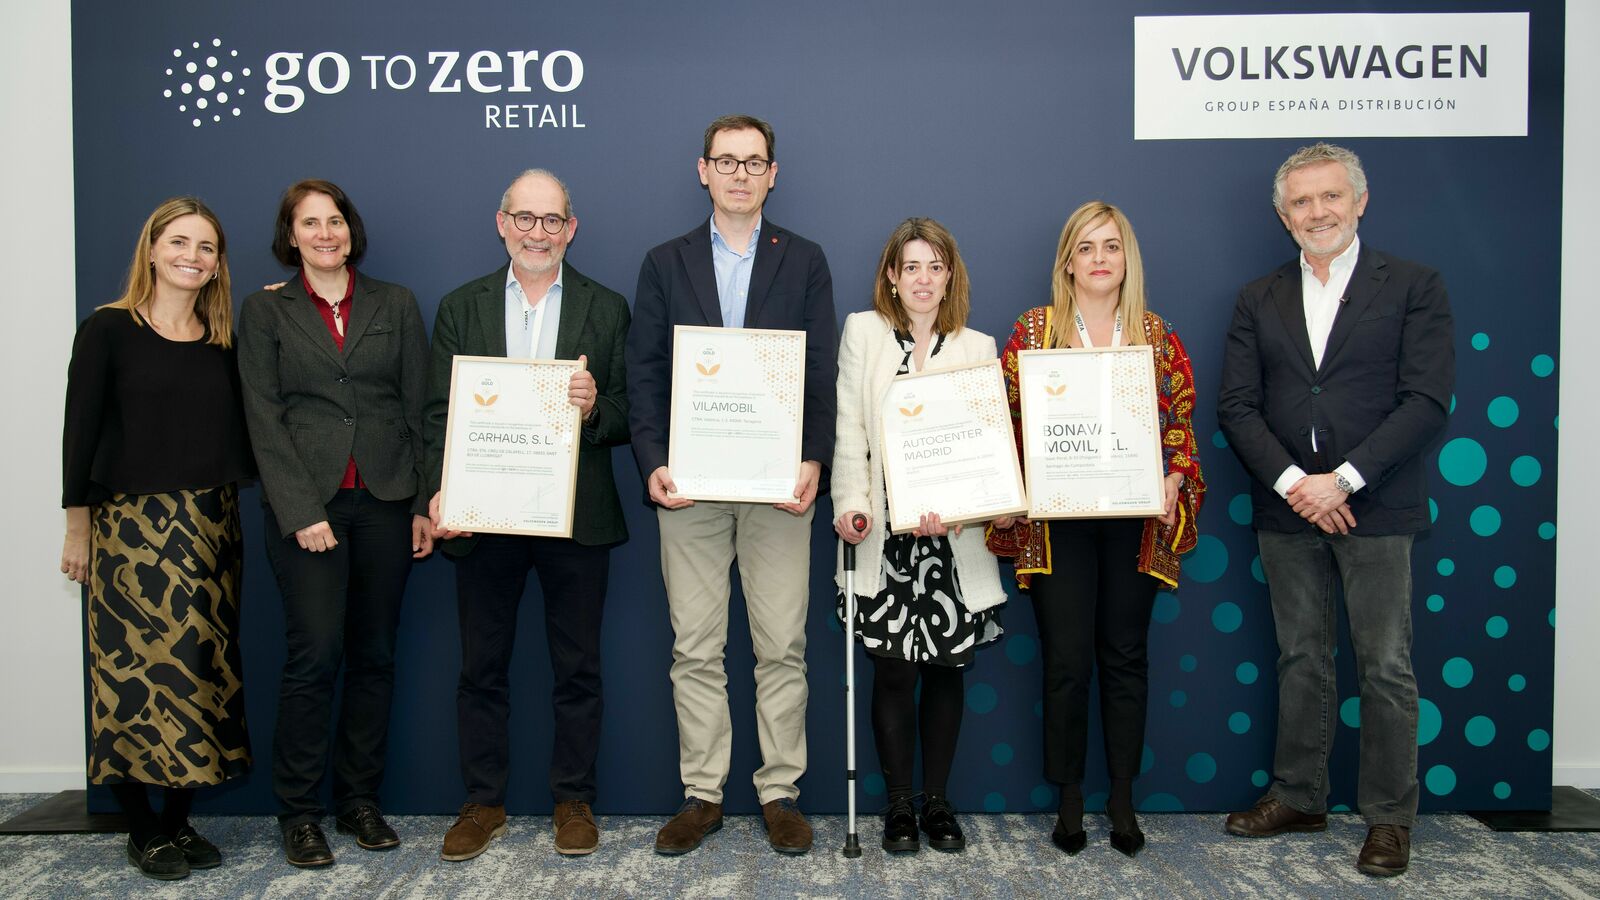 Group of six individuals proudly displaying certificates in front of a 'Go to Zero Retail' backdrop of the Volkswagen Group.